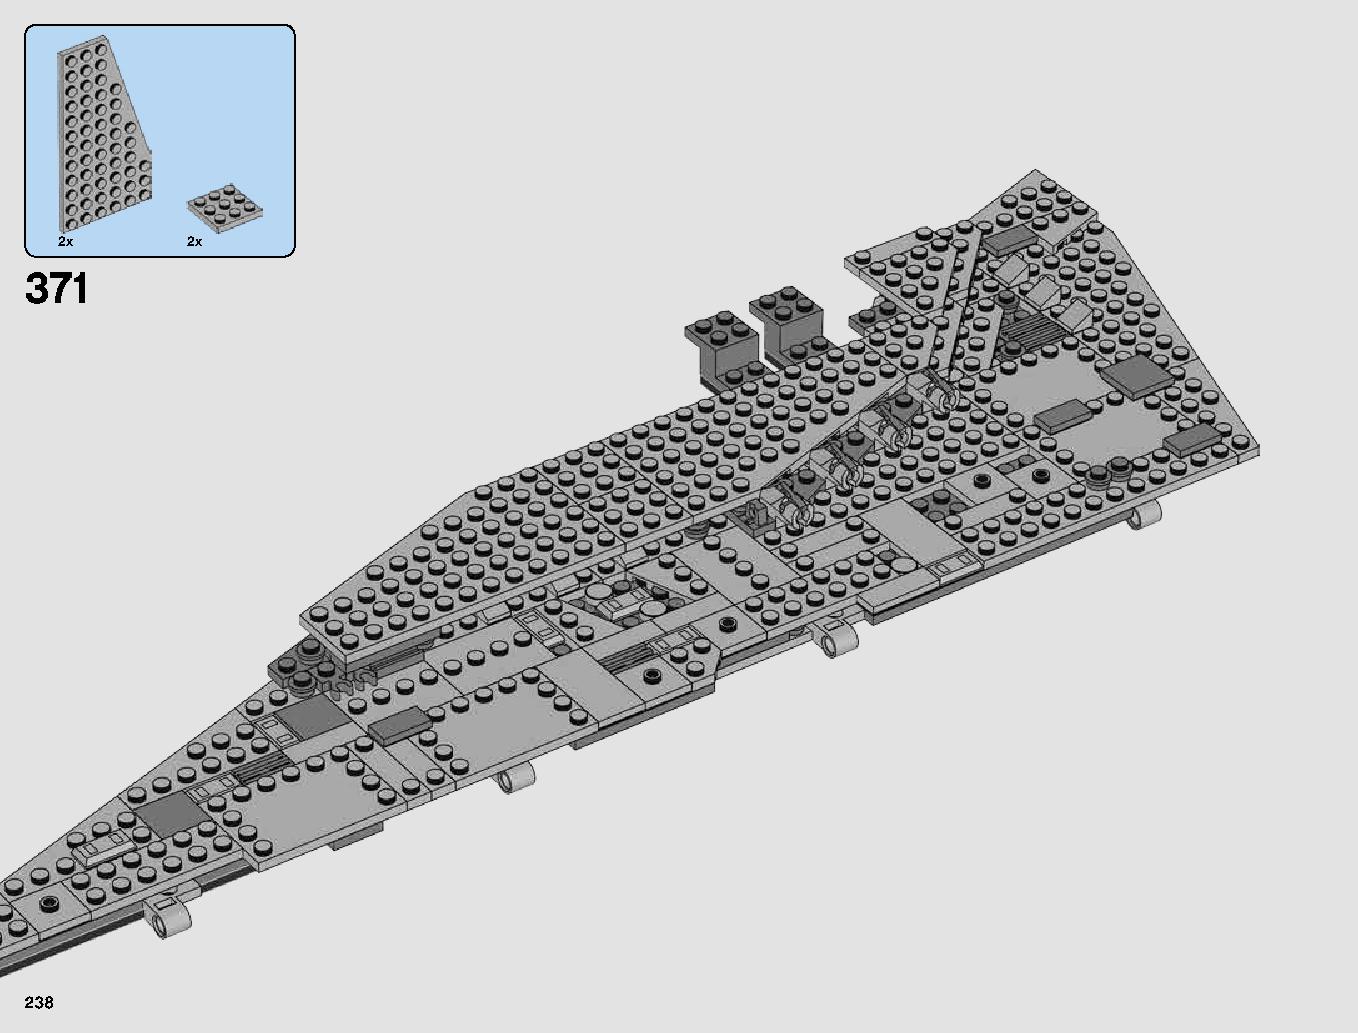 First Order Star Destroyer 75190 レゴの商品情報 レゴの説明書・組立方法 238 page